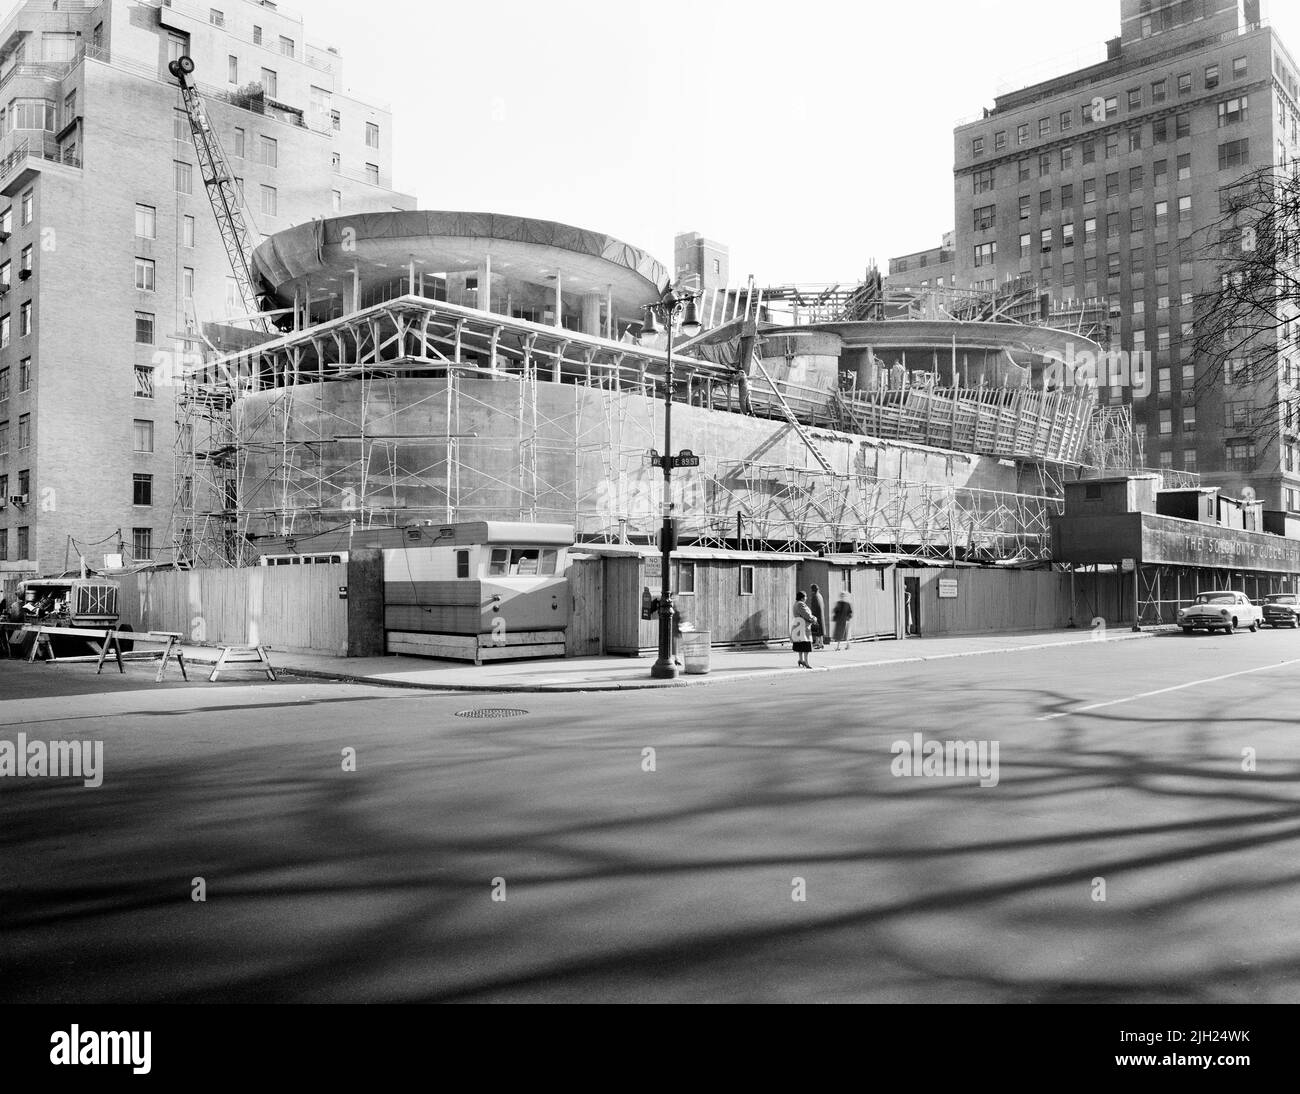 Guggenheim Museum under Construction, Fifth Avenue between 88th and 89th Streets, New York City, New York, USA, Gottscho-Schleisner Collection, November 1957 Stock Photo